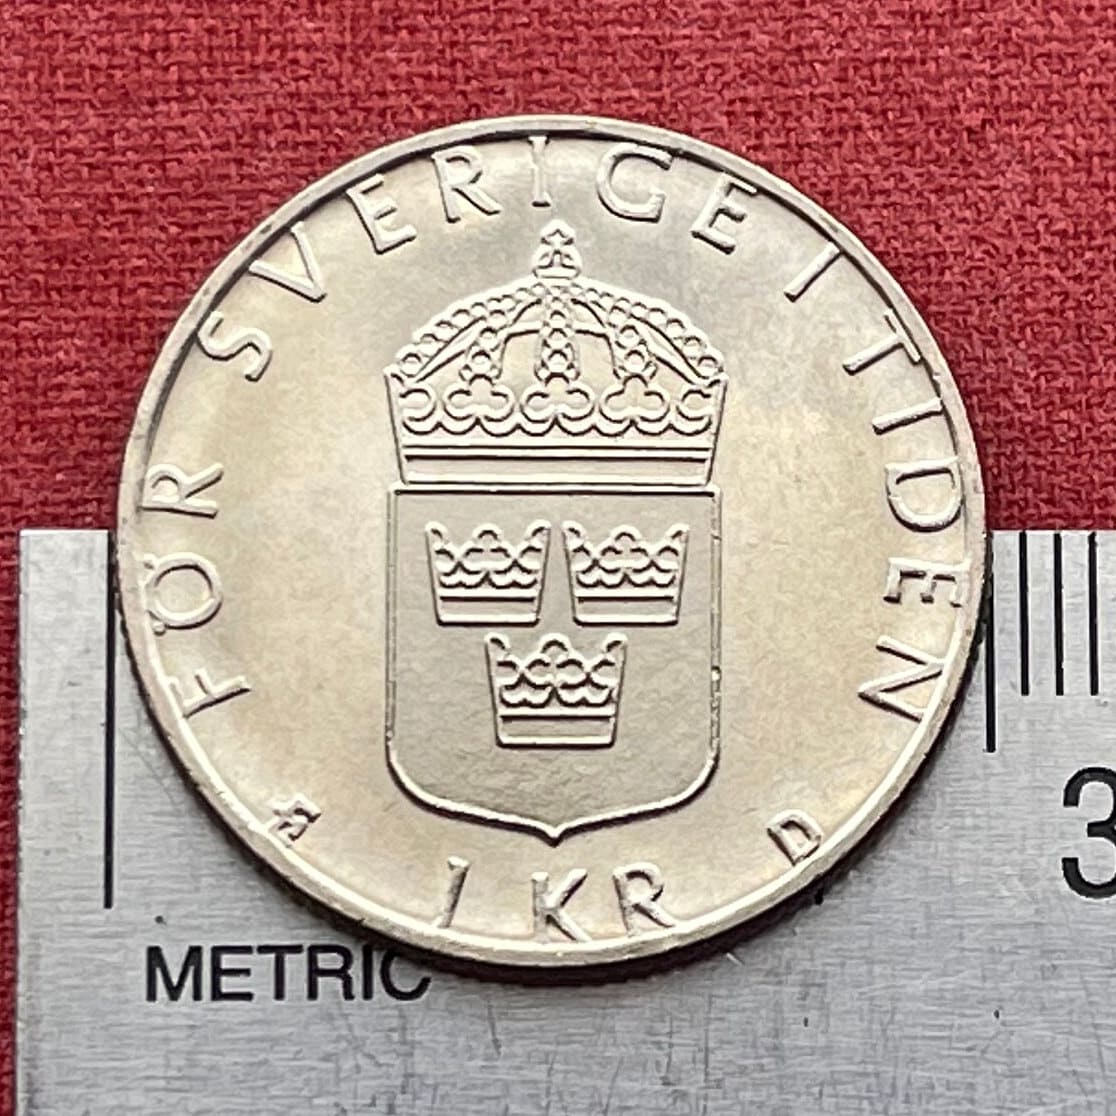 King Carl XVI Gustaf 1 Krona Sweden Authentic Coin Money for Jewelry and Craft Making (Three Crowns)